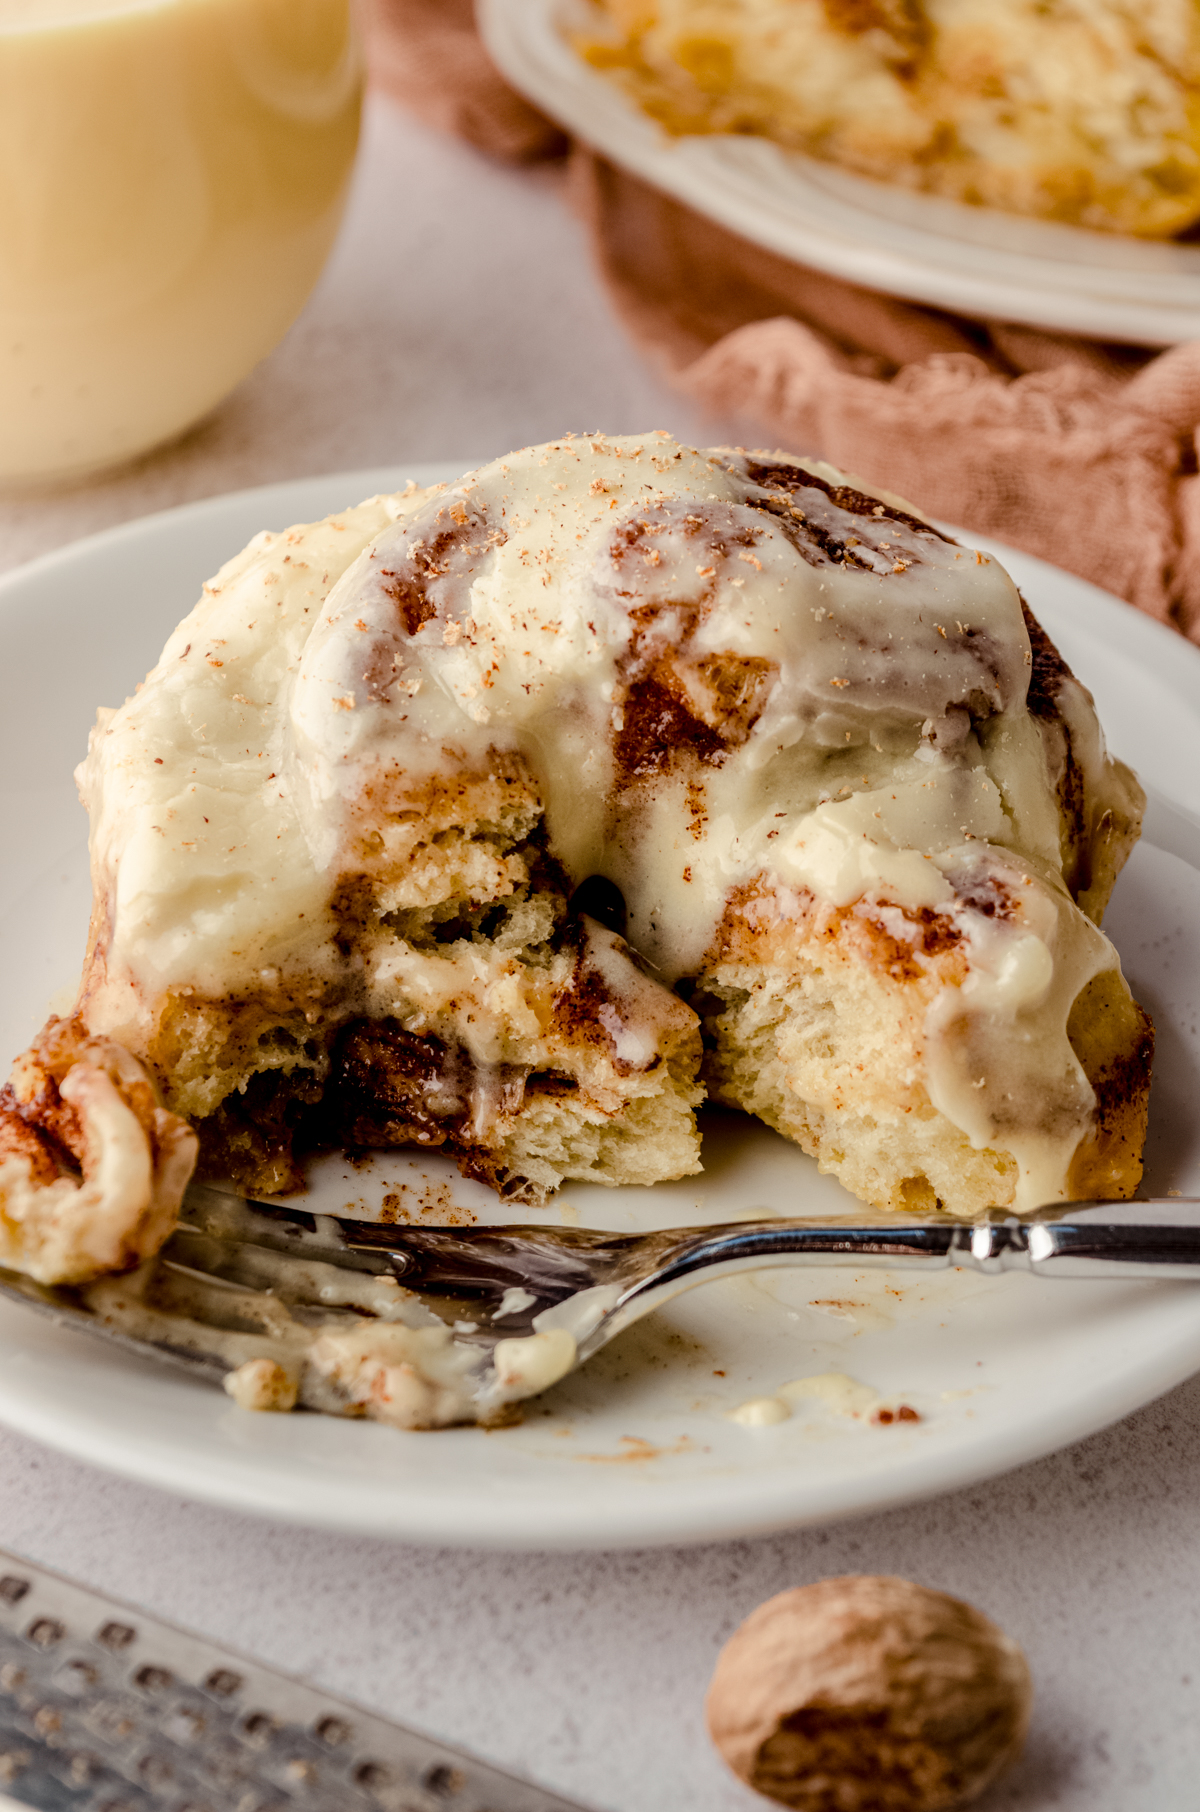 An eggnog cinnamon roll on a plate with a fork. A bite has been taken out of it.